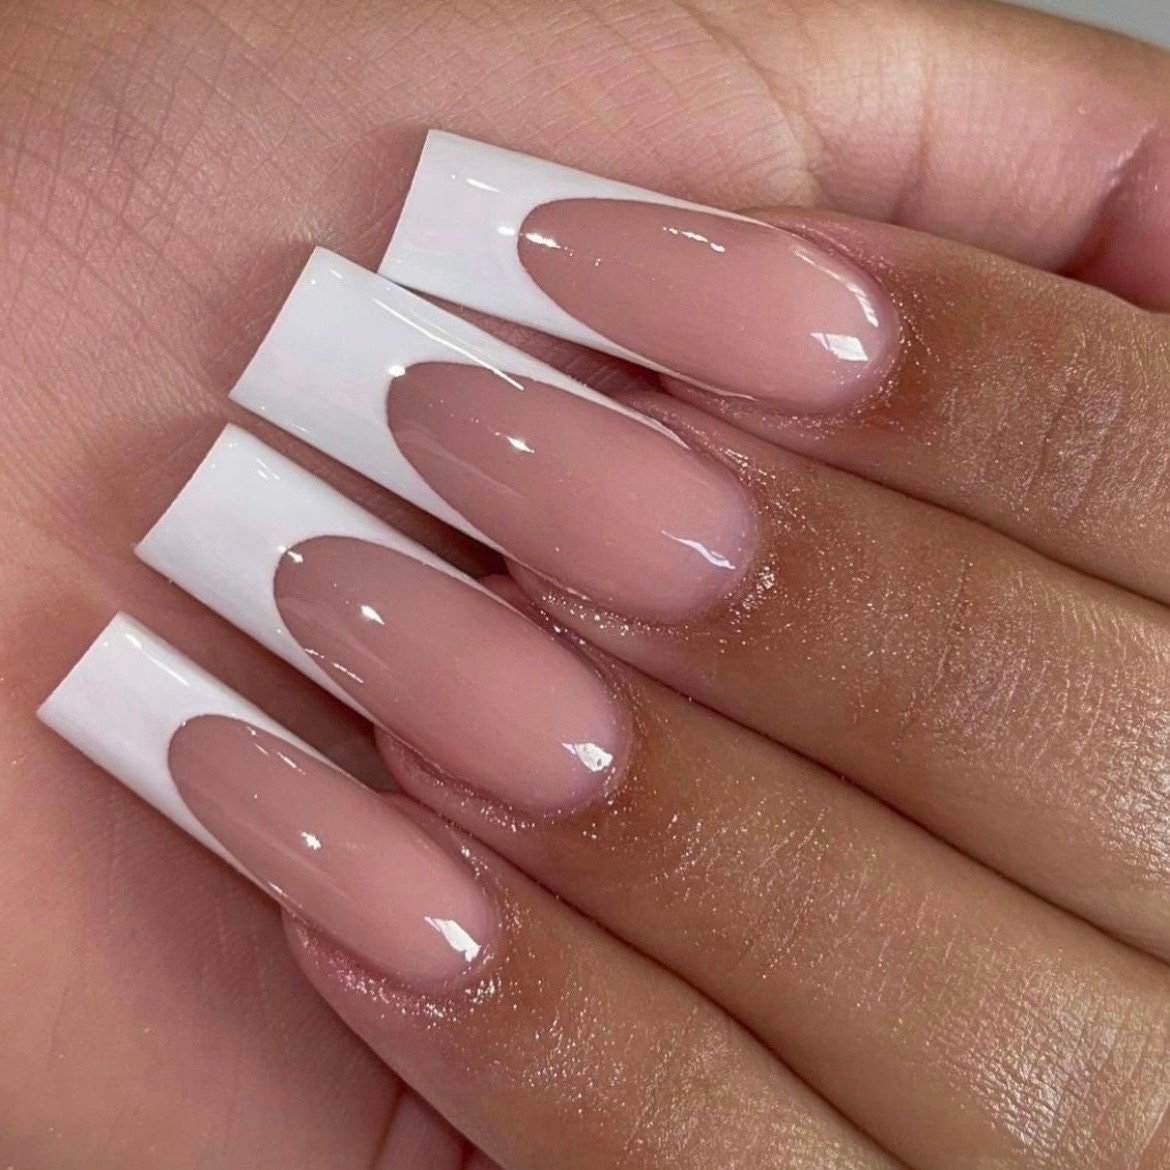 24pcs French False Nails Short Stick on Nails White Tip Press on Nails  Glitter Pink & Heart Design Removable Glue-on Nails Fake Nails Women Girls  Nail Art Accessories : Amazon.co.uk: Beauty